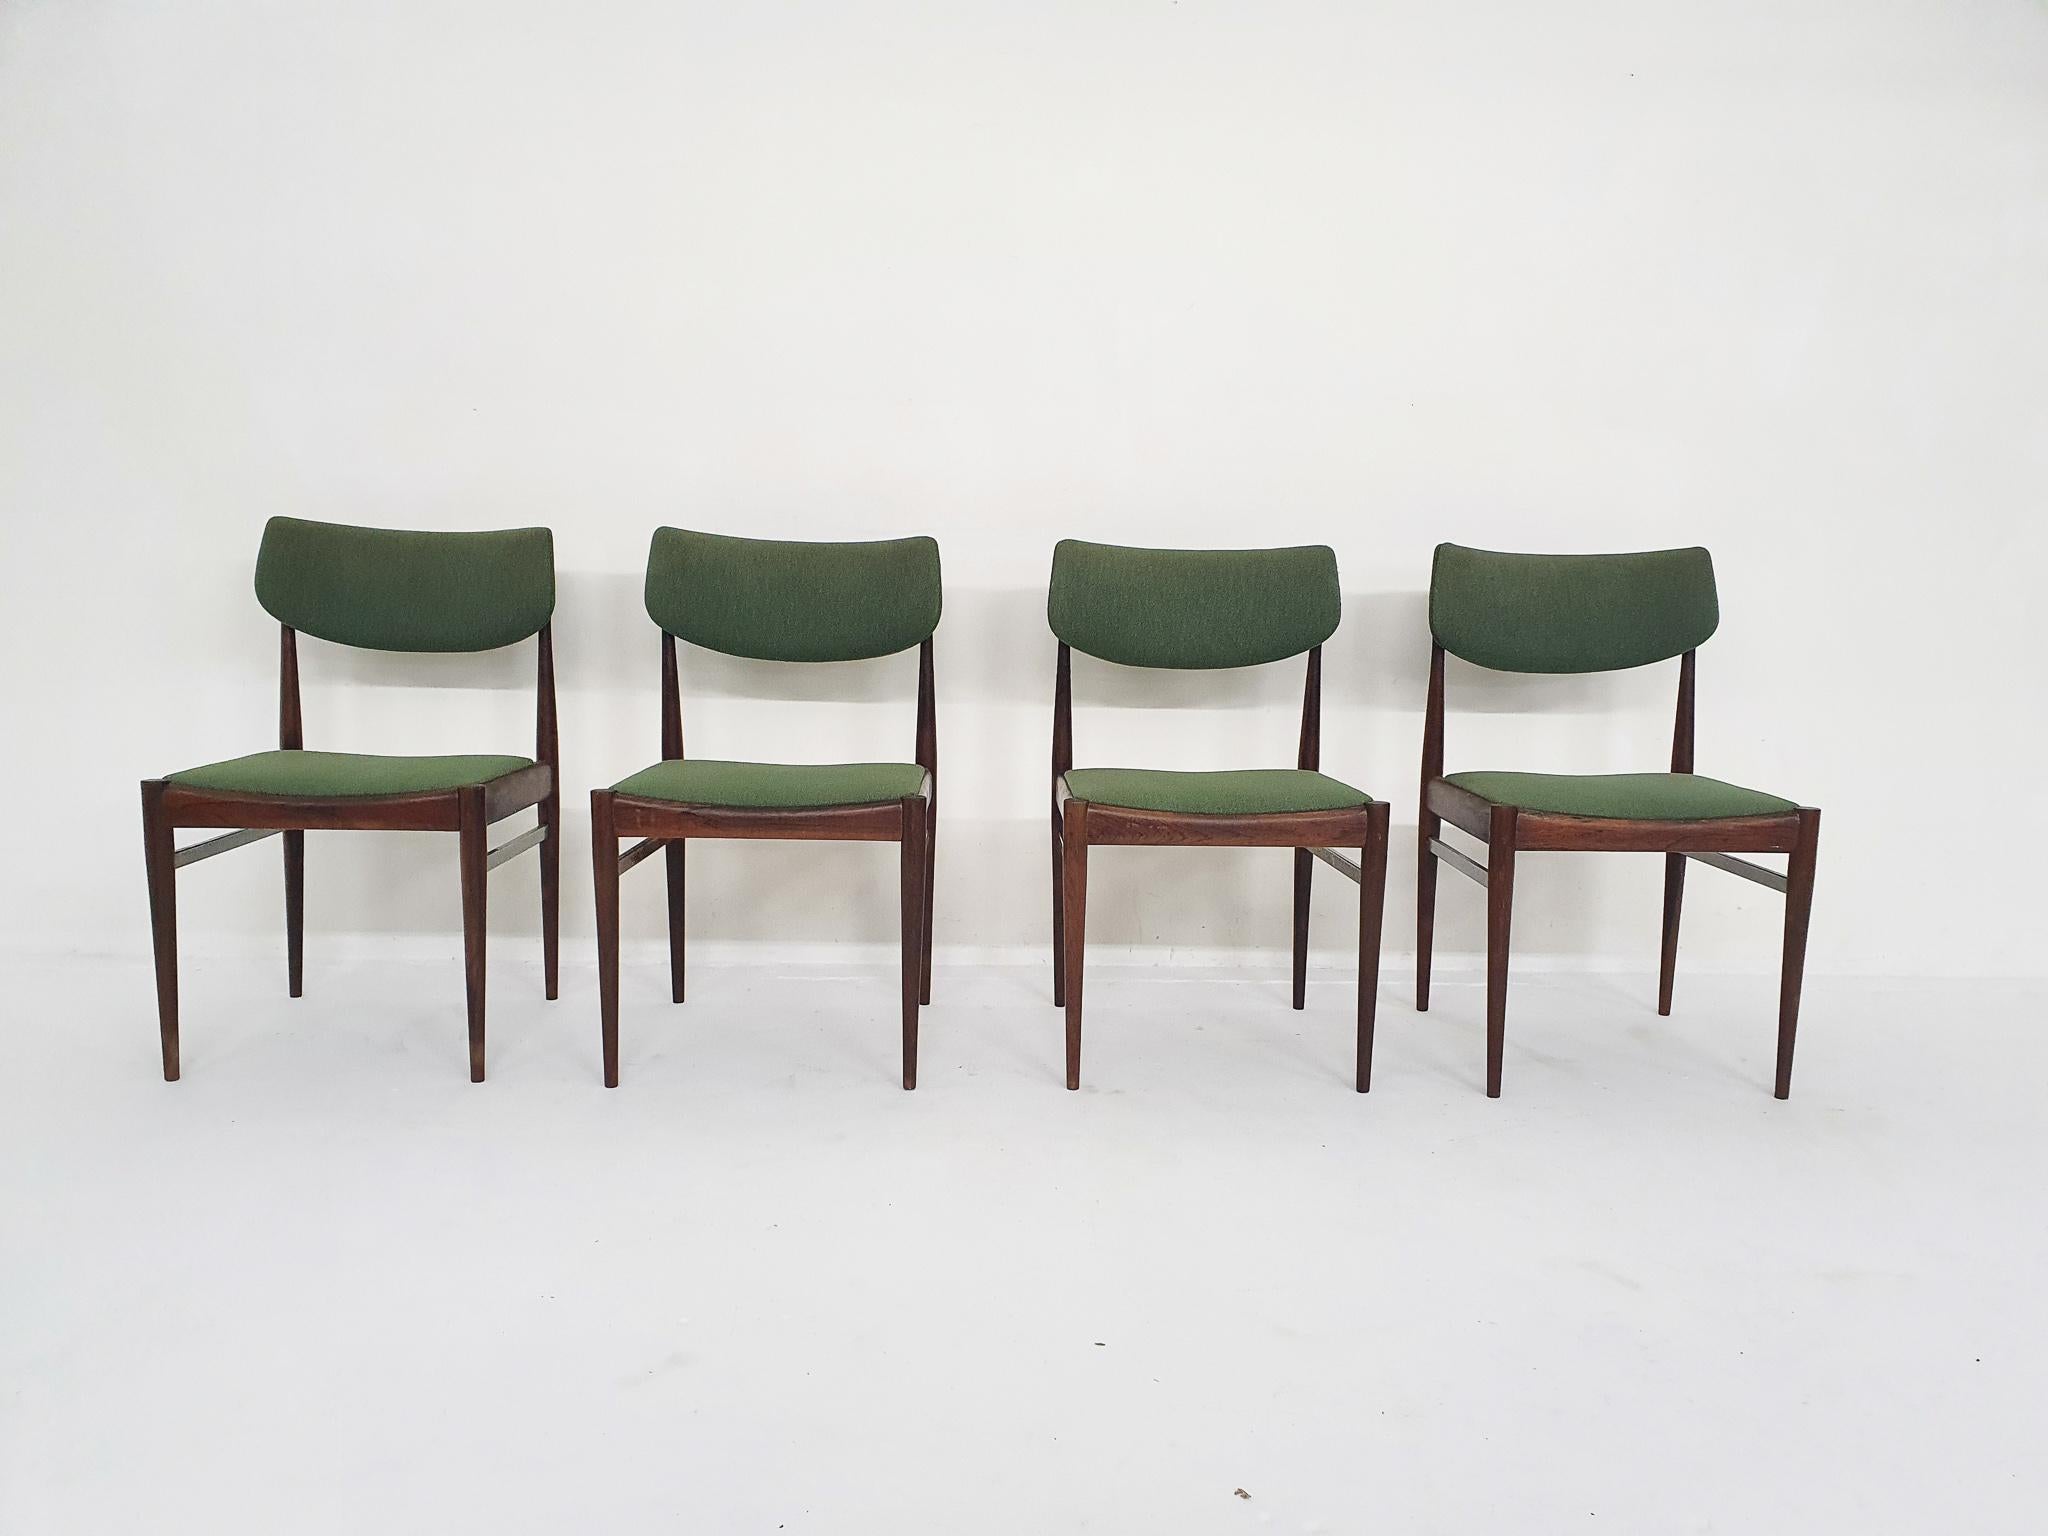 Four rosewood dining chairs with green upholstery. Some light stains on the fabric.